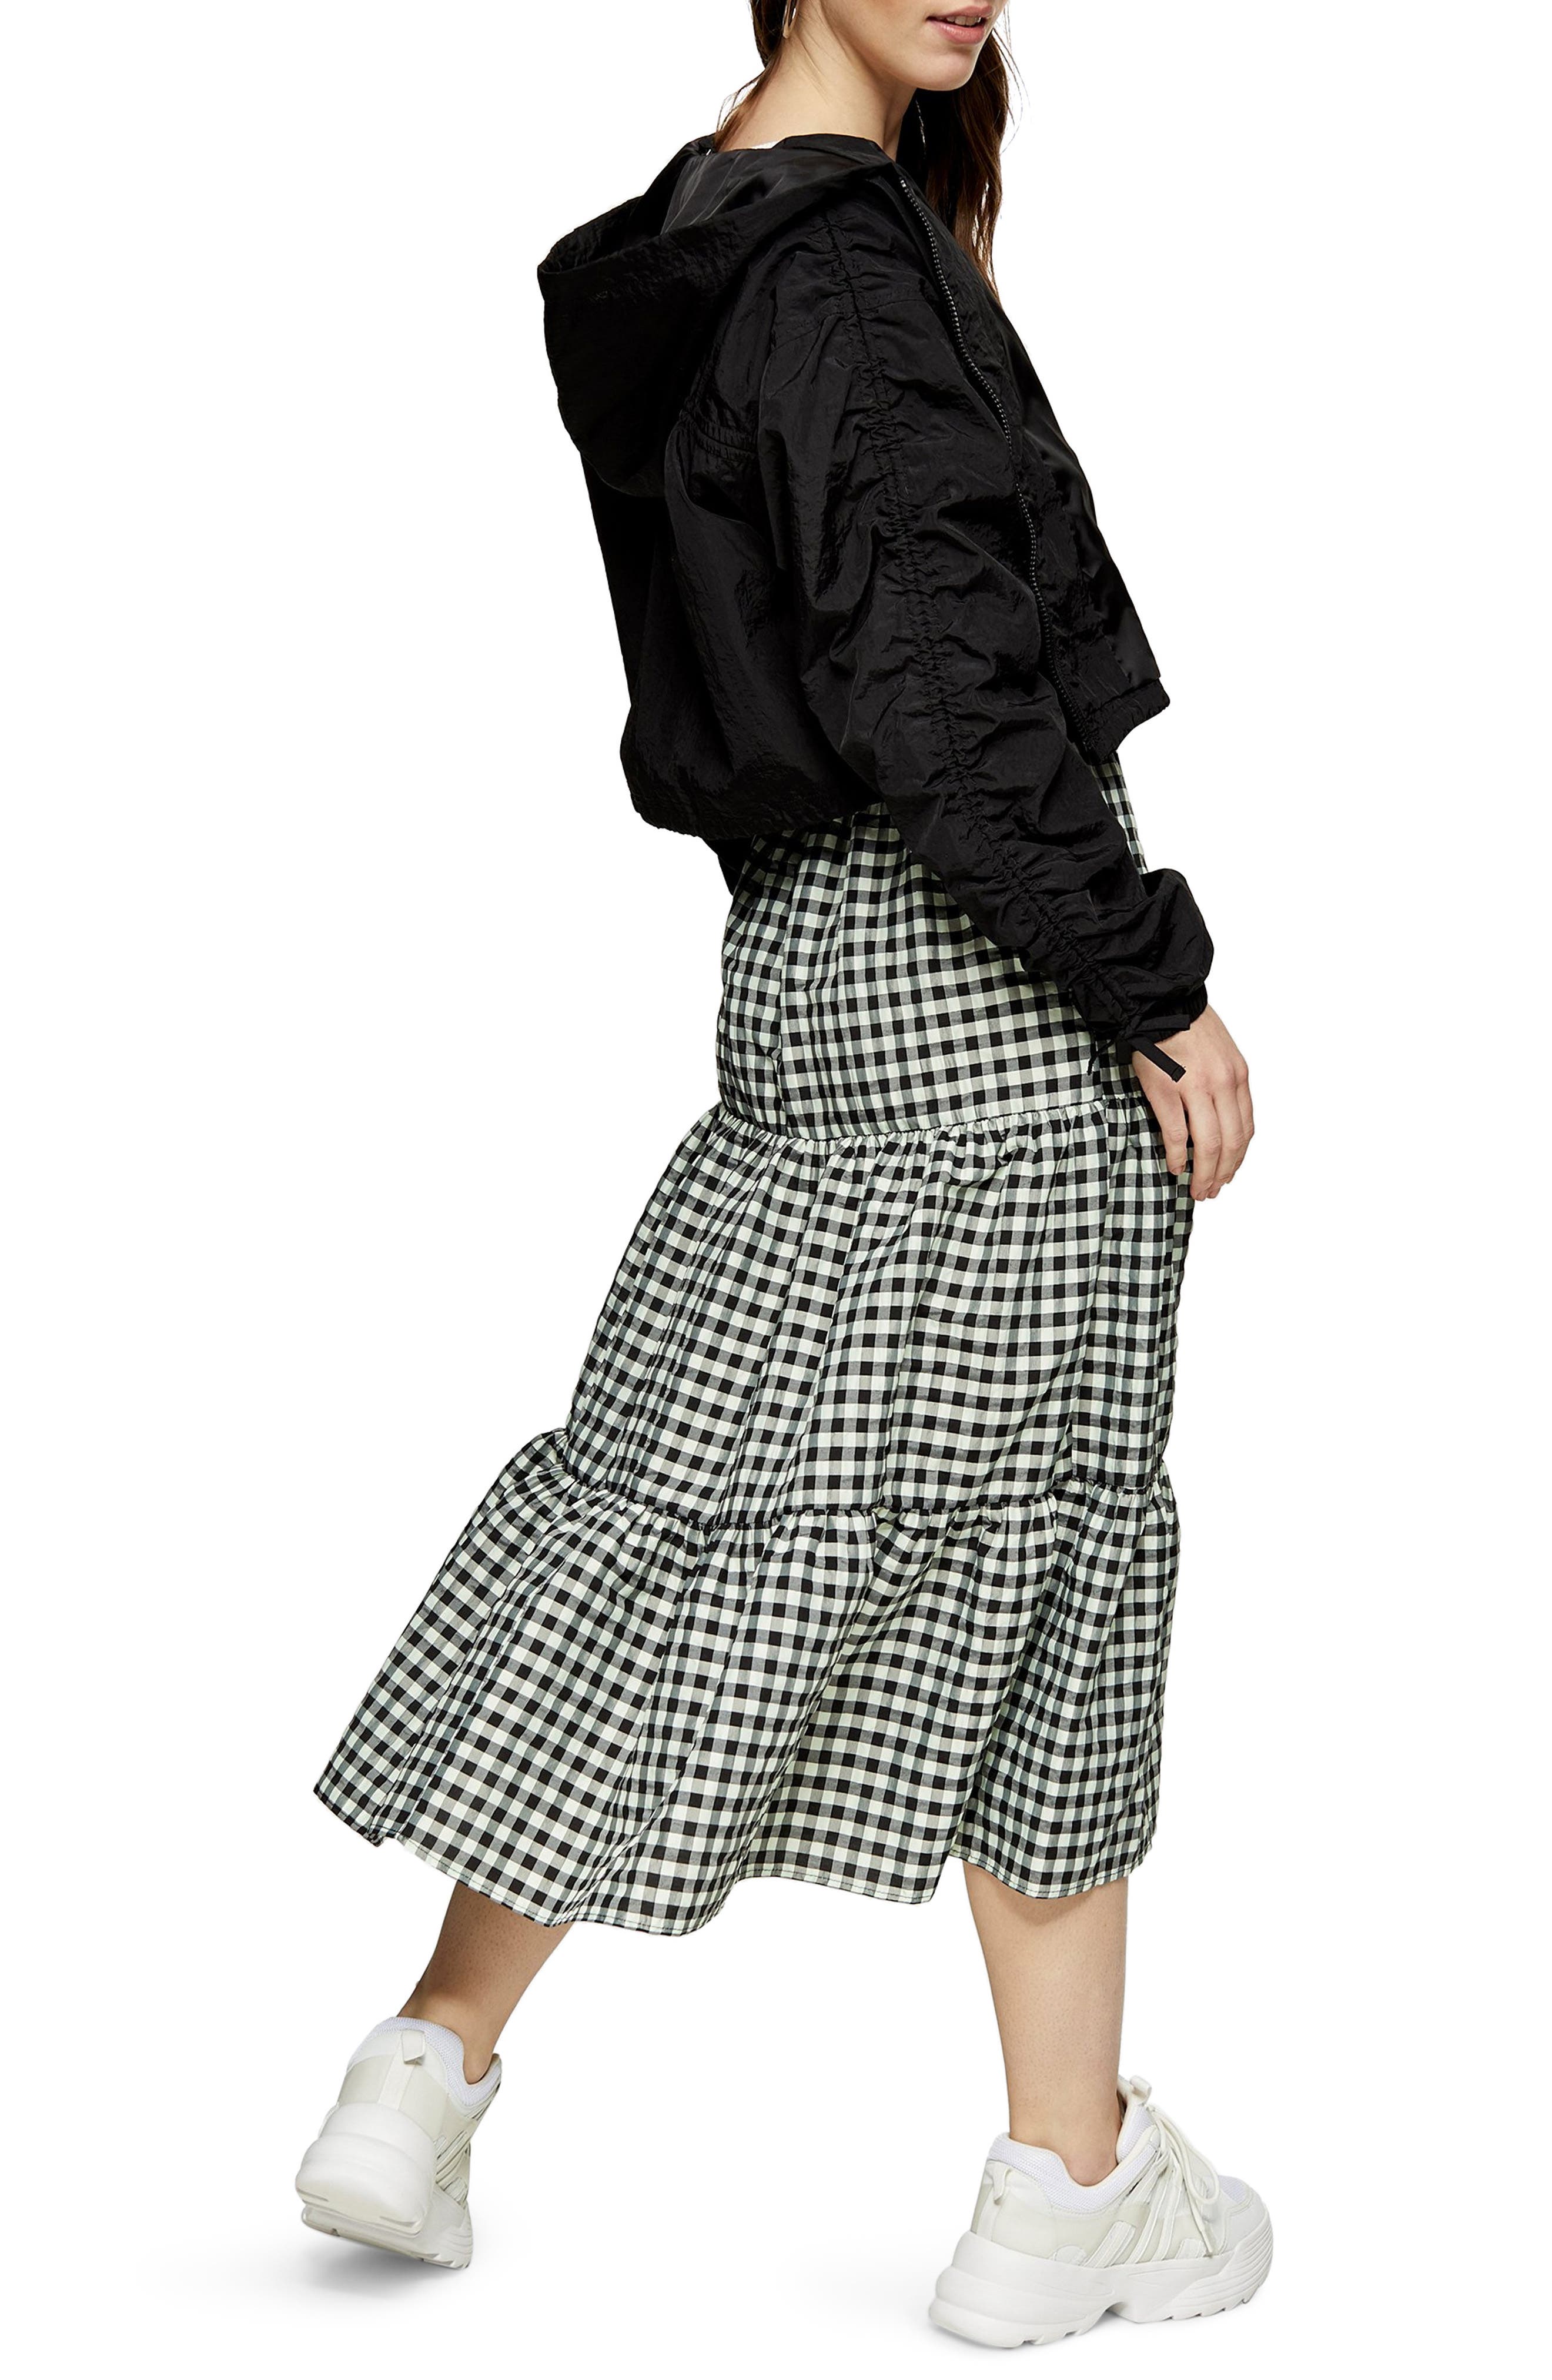 Topshop + Gingham Check Tiered Skirt